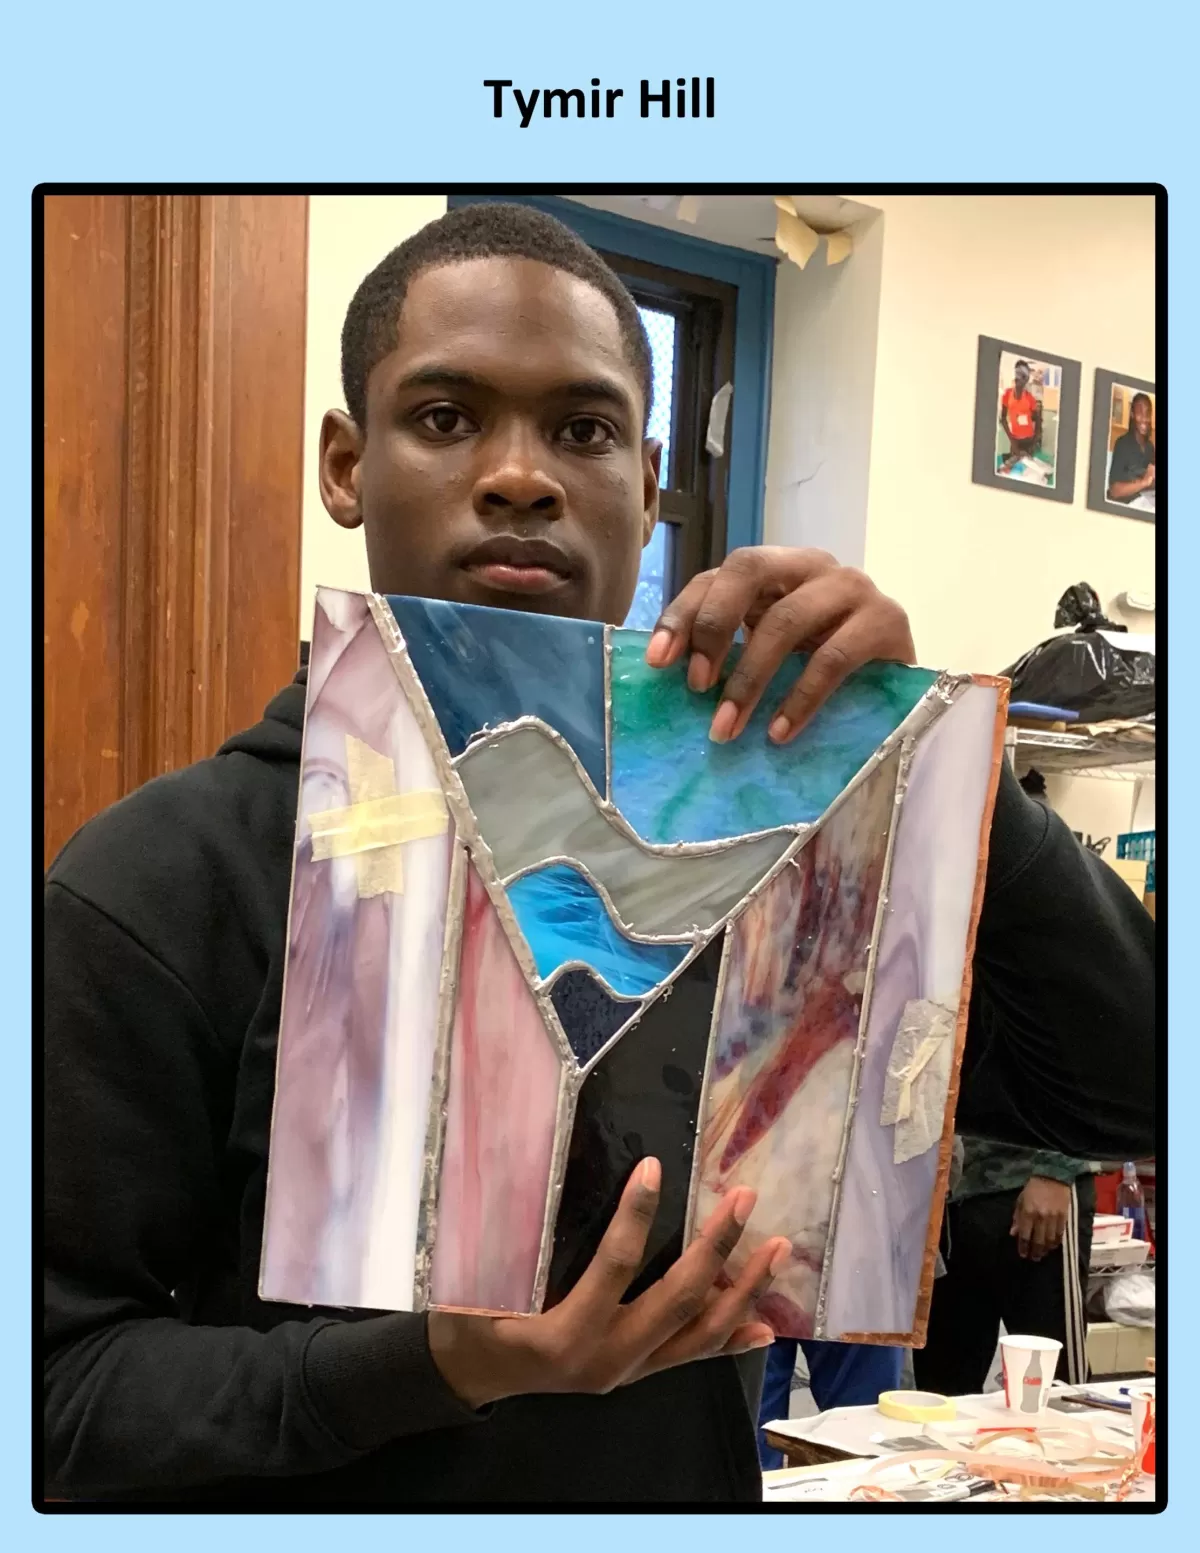 Tymir Hill with his project - Photo Credit: The Stained Glass Project